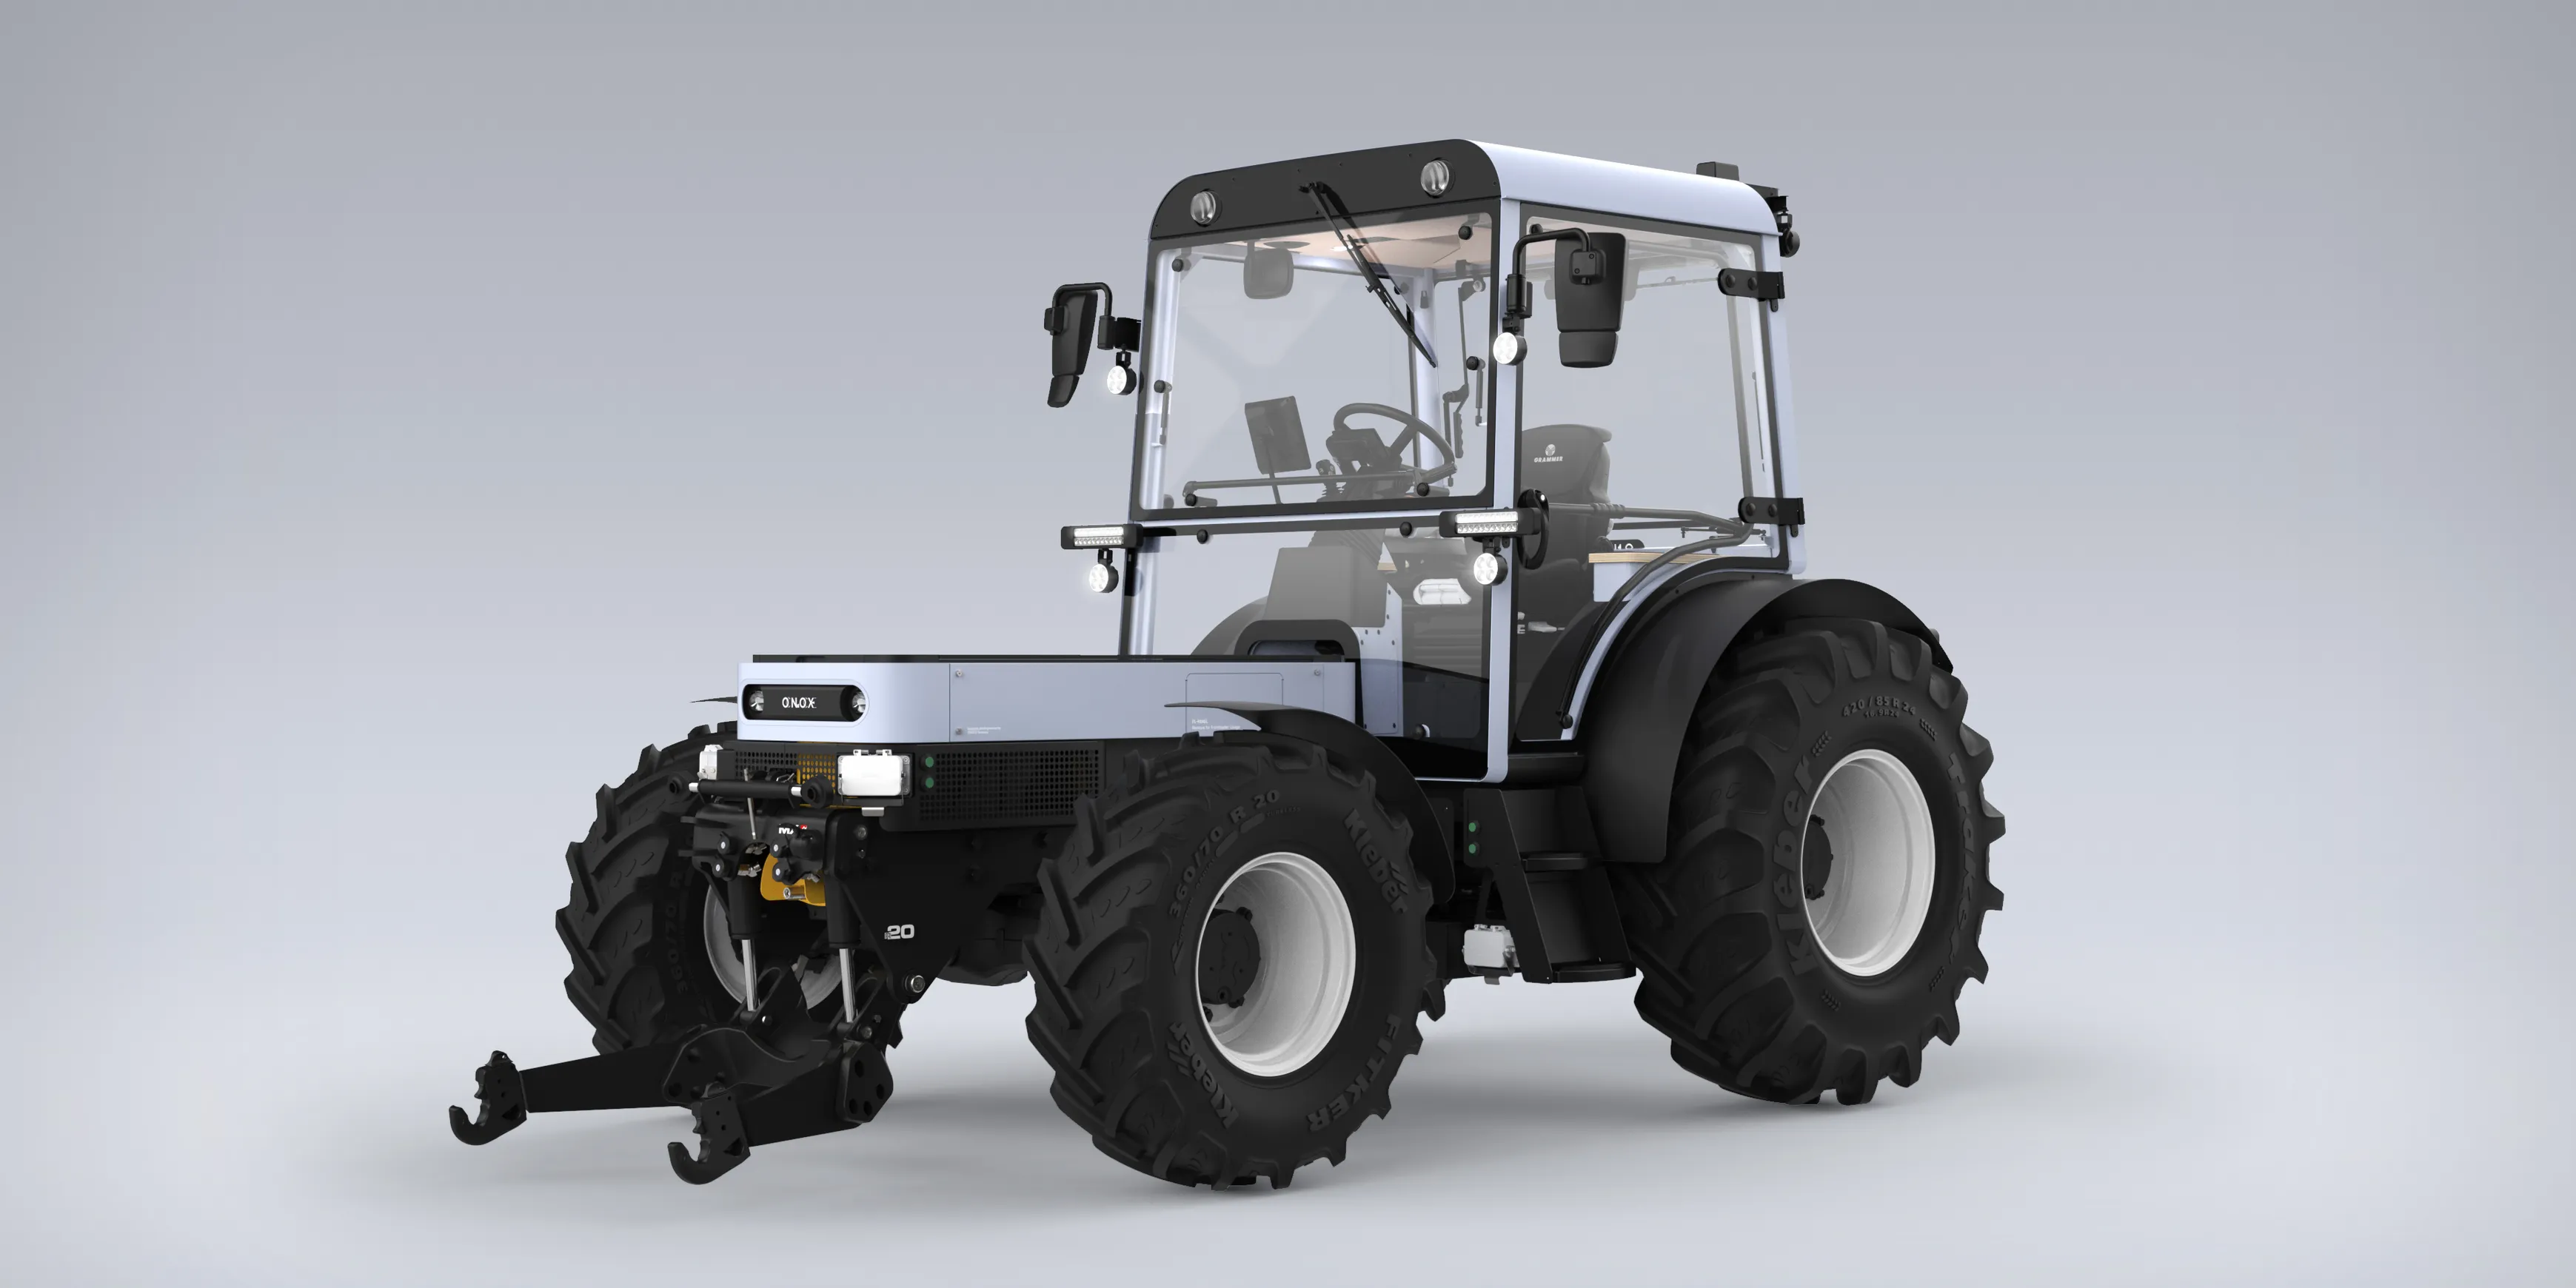 A front perspective view of the Onox electric tractor on a blue background